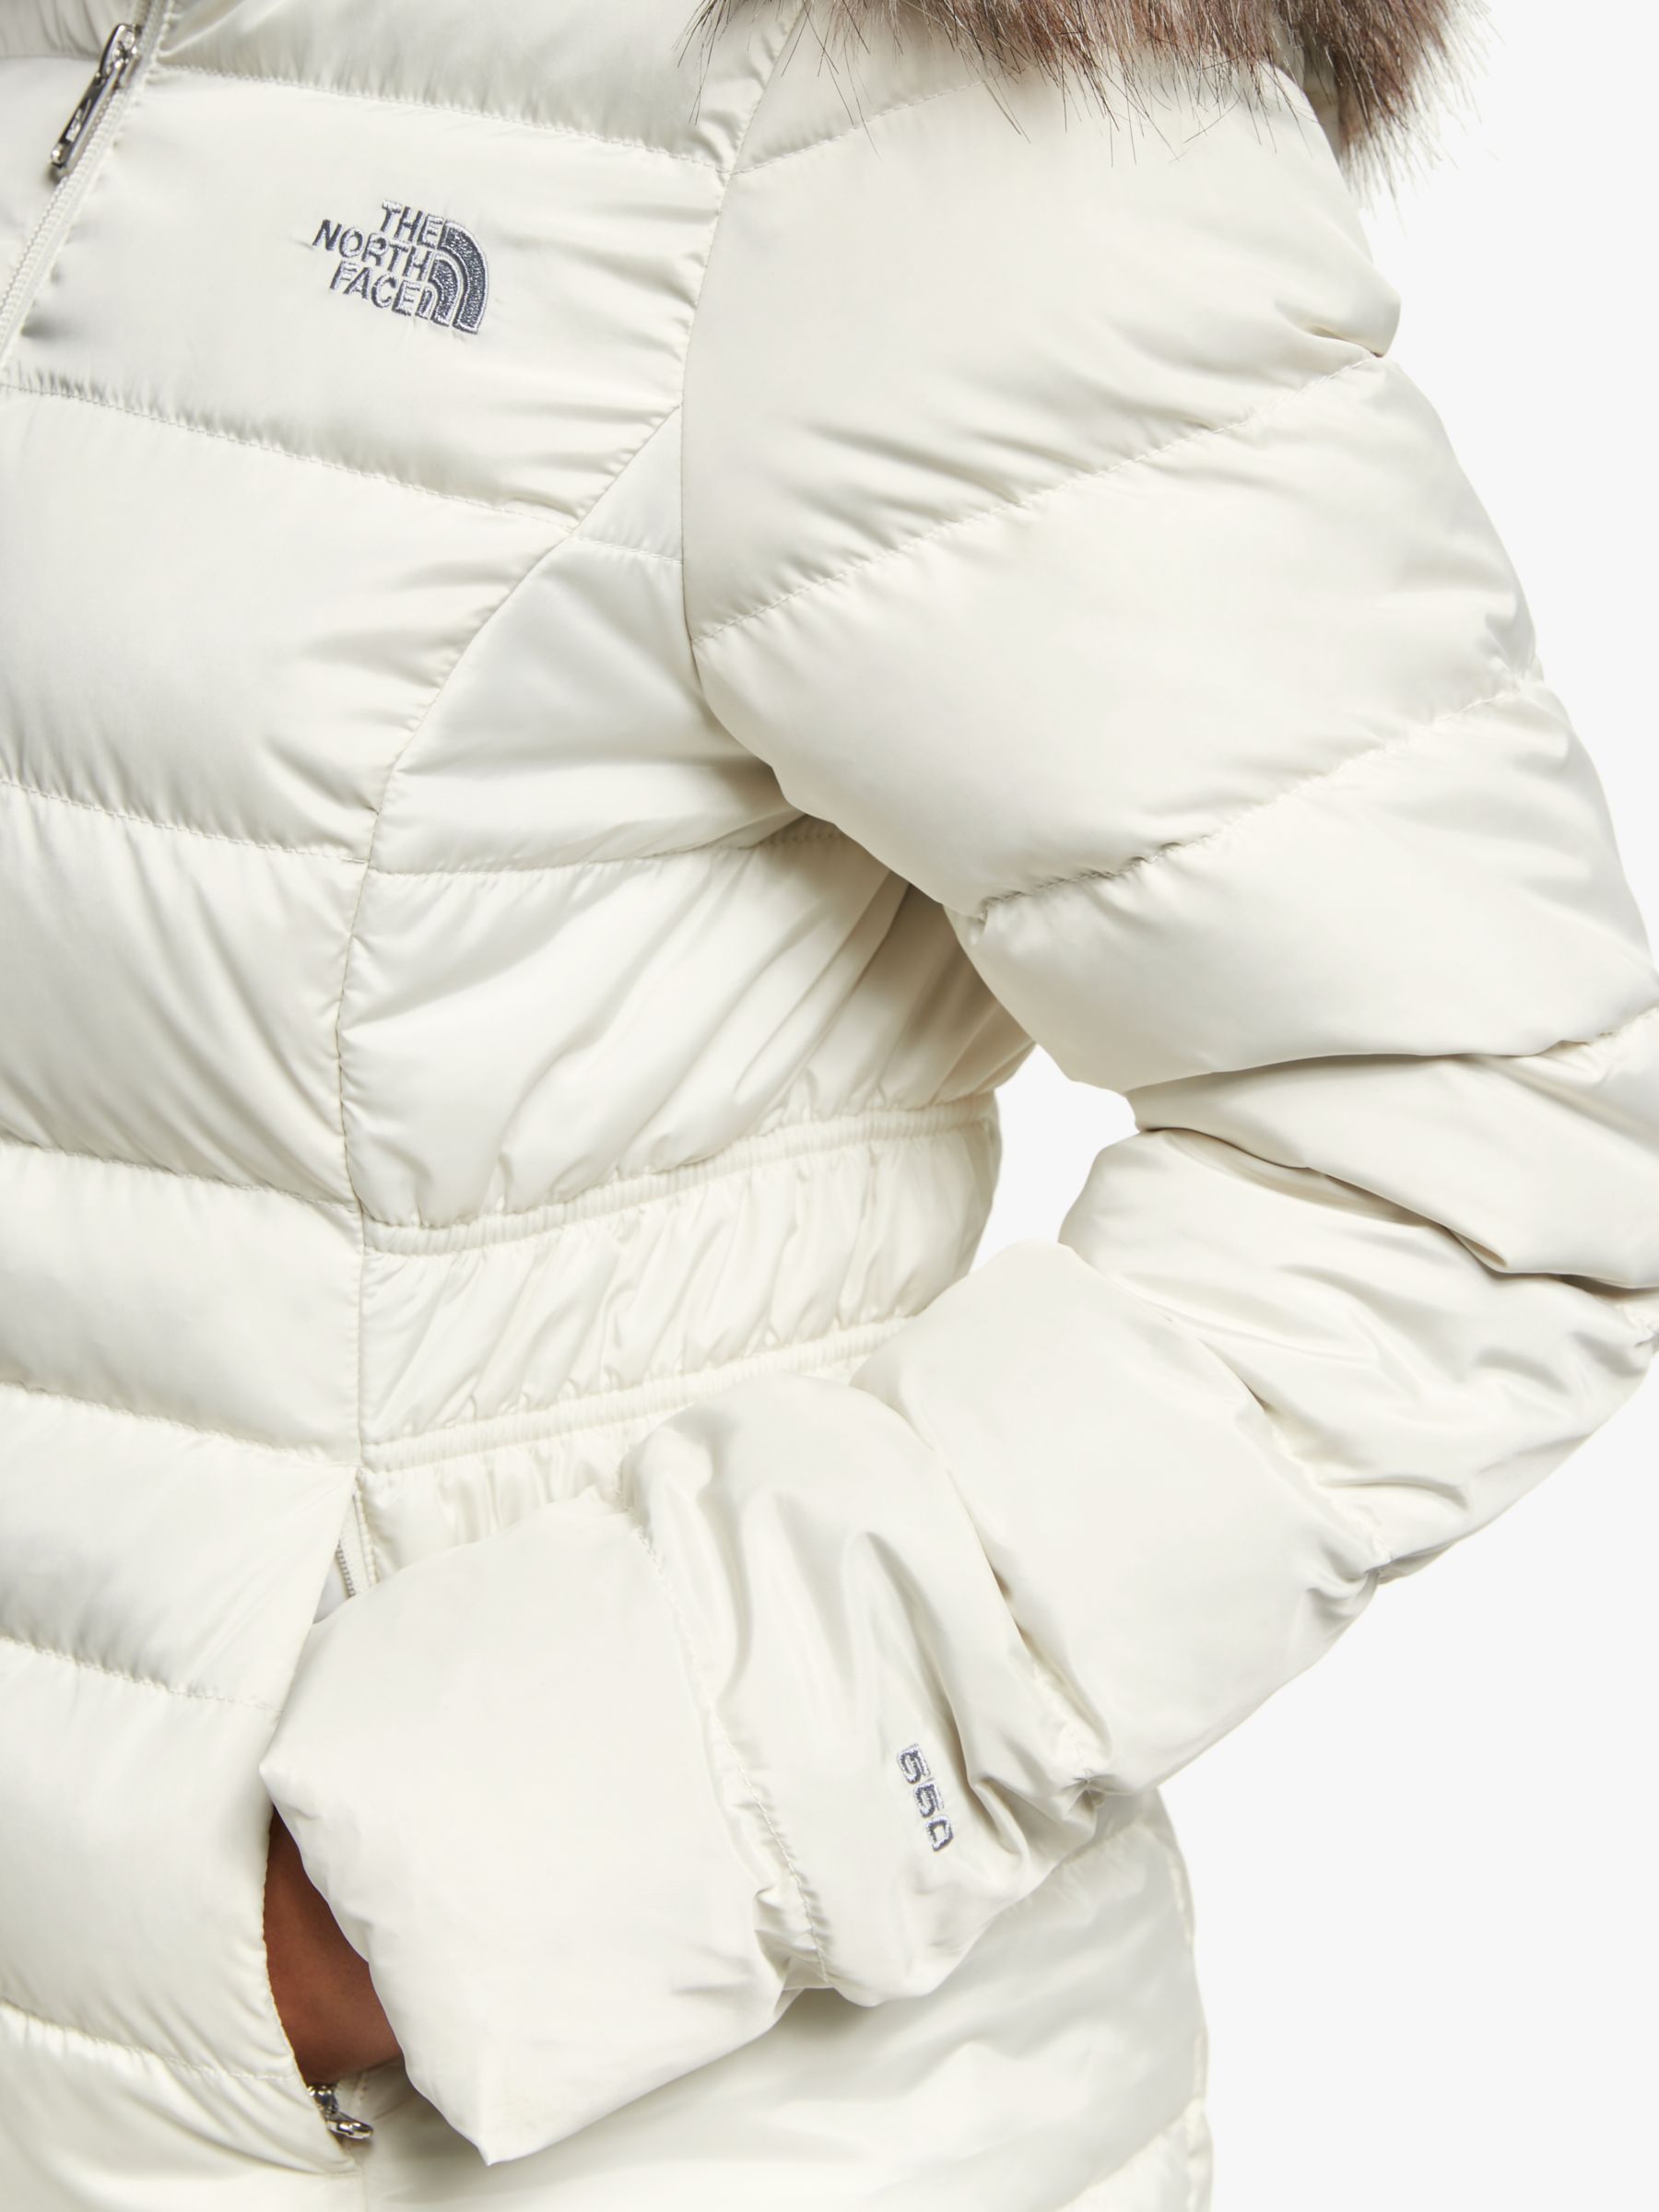 white north face coat womens